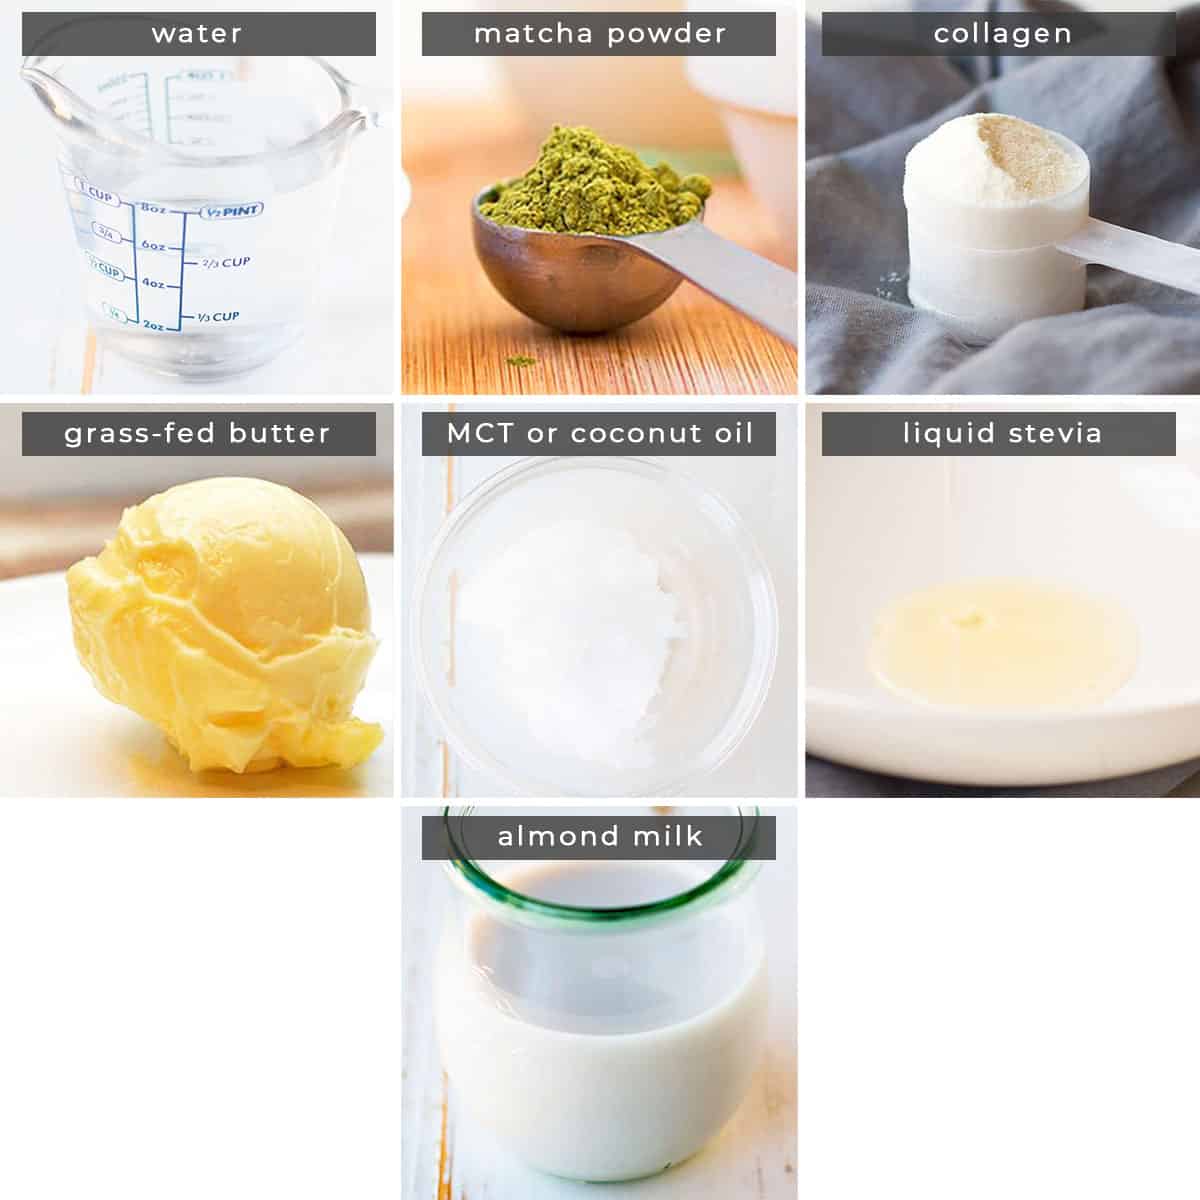 Image containing recipe ingredients water, matcha powder, collagen, grass-fed butter, MCT or coconut oil, liquid stevia, and almond milk. 